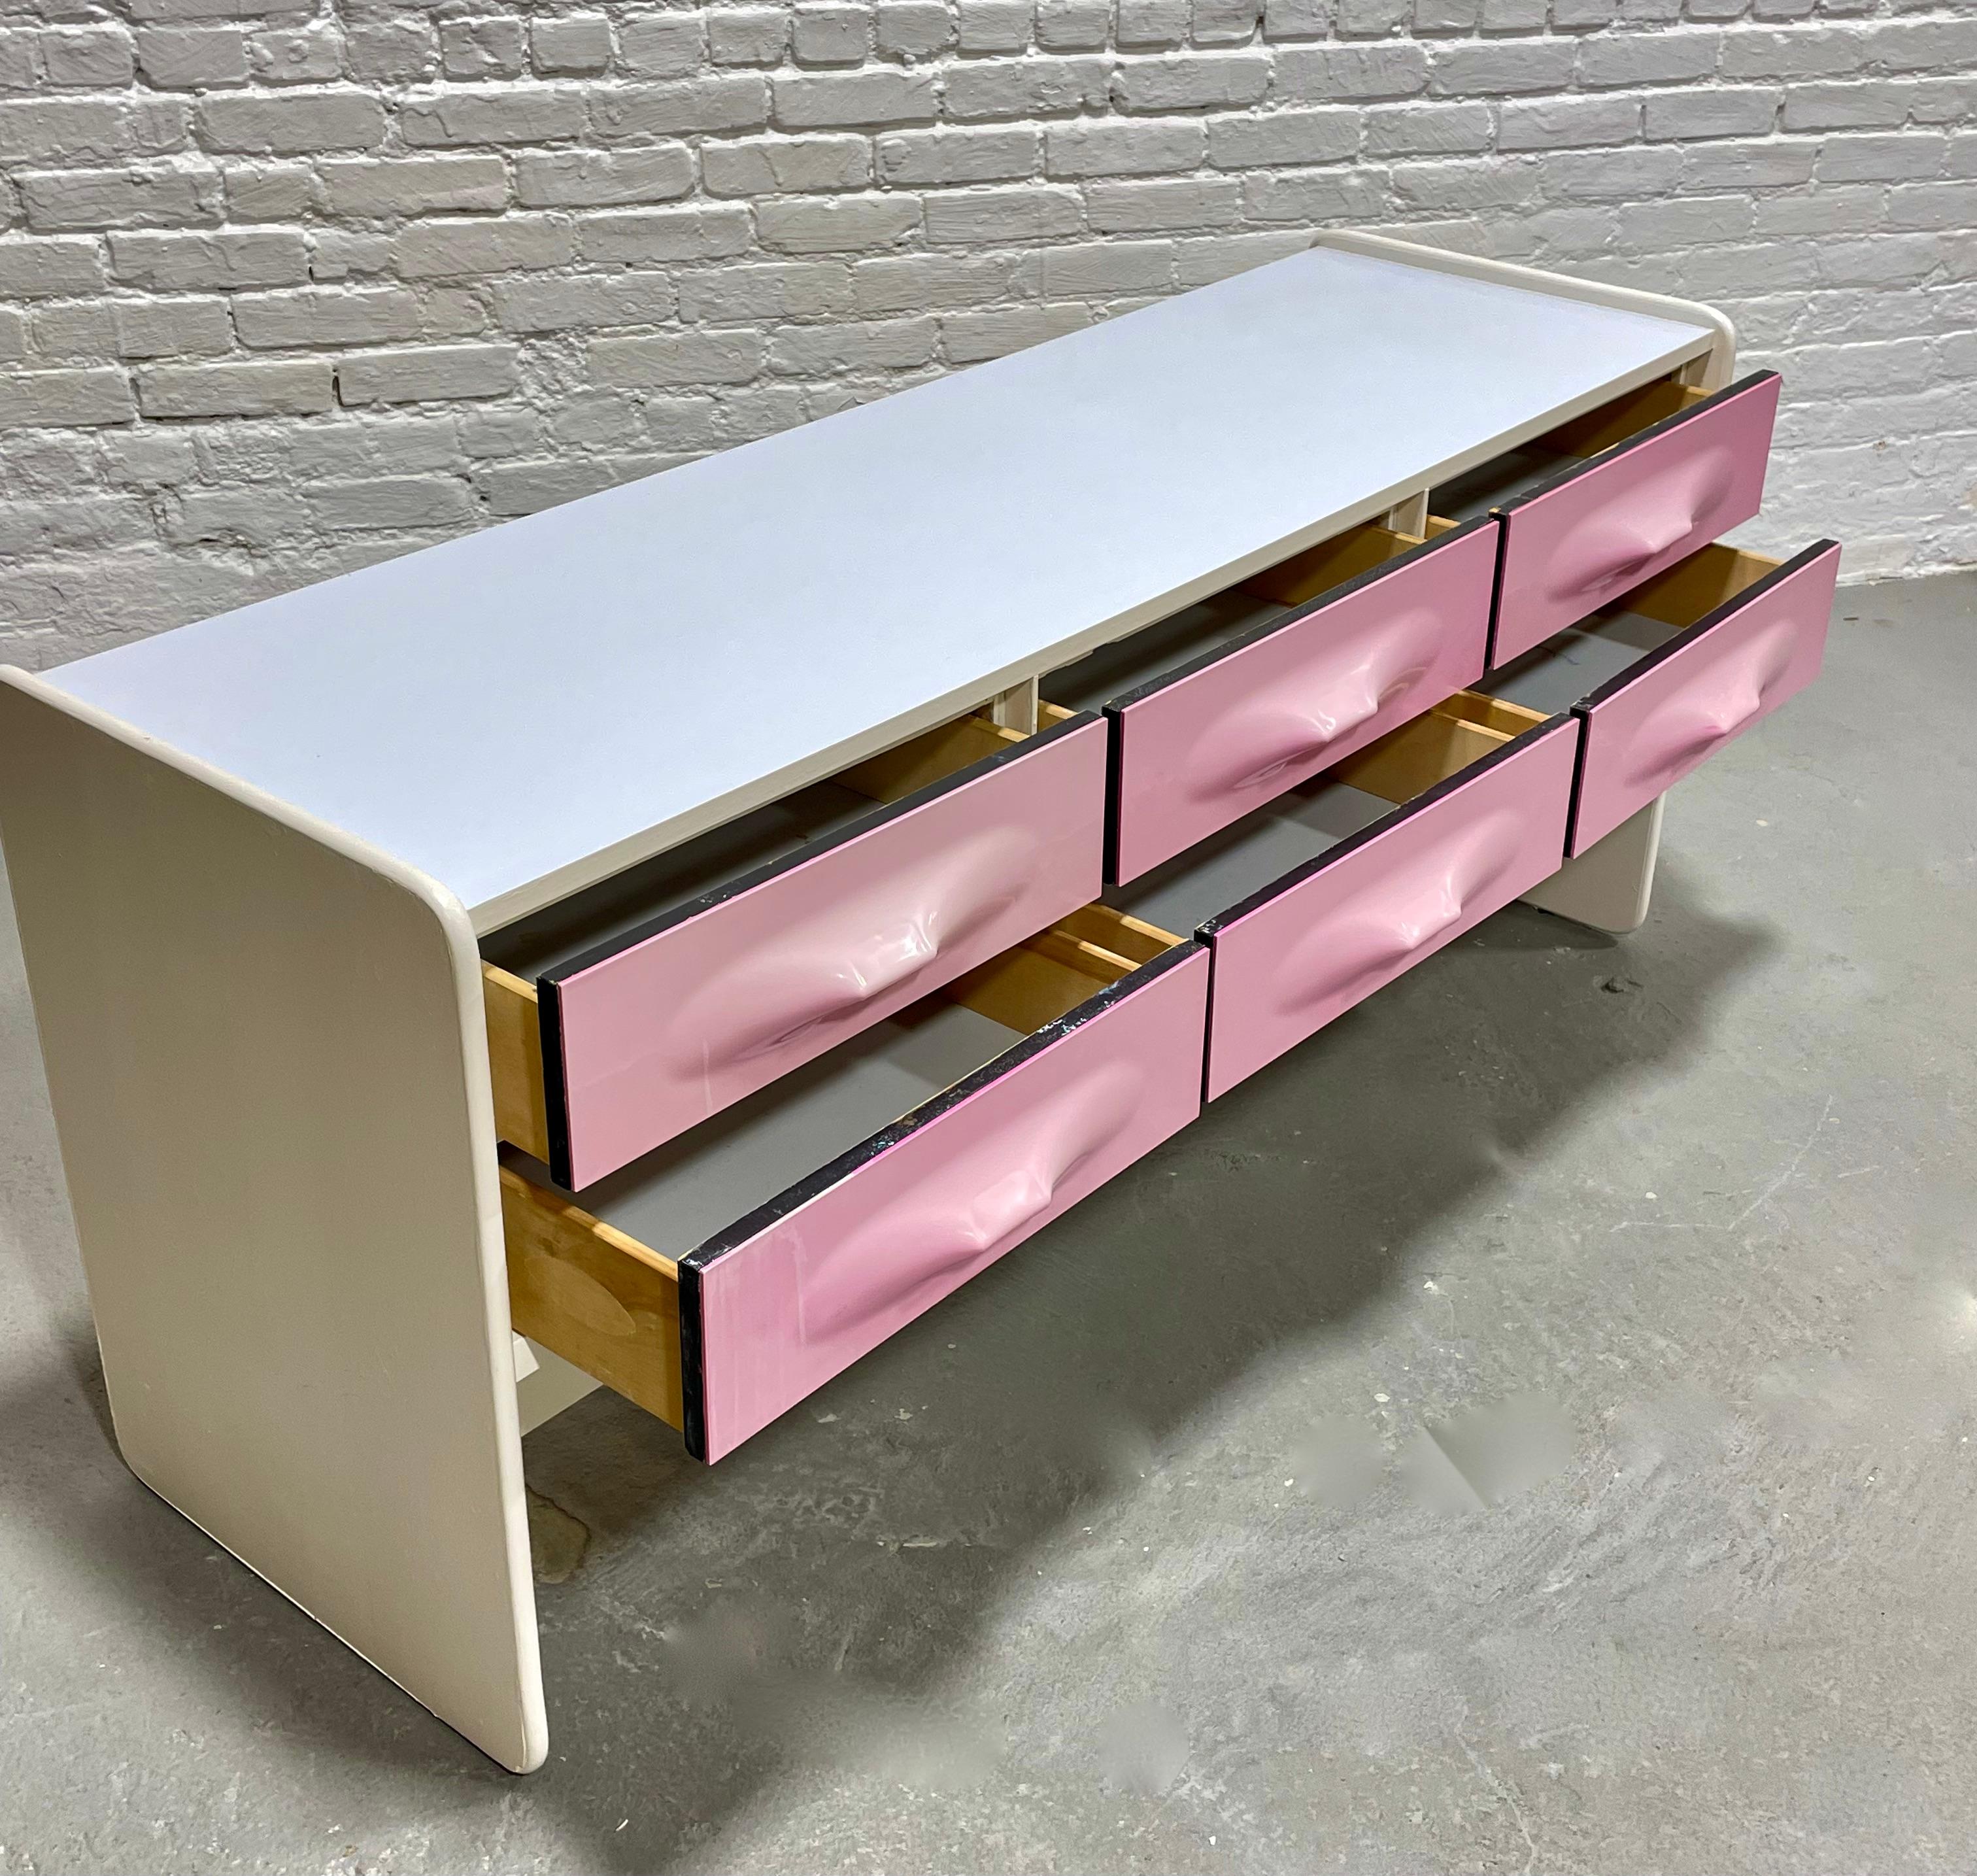 Midcentury Raymond Loewy Styled Molded Long Dresser by Giovanni Maur for Trecor 1